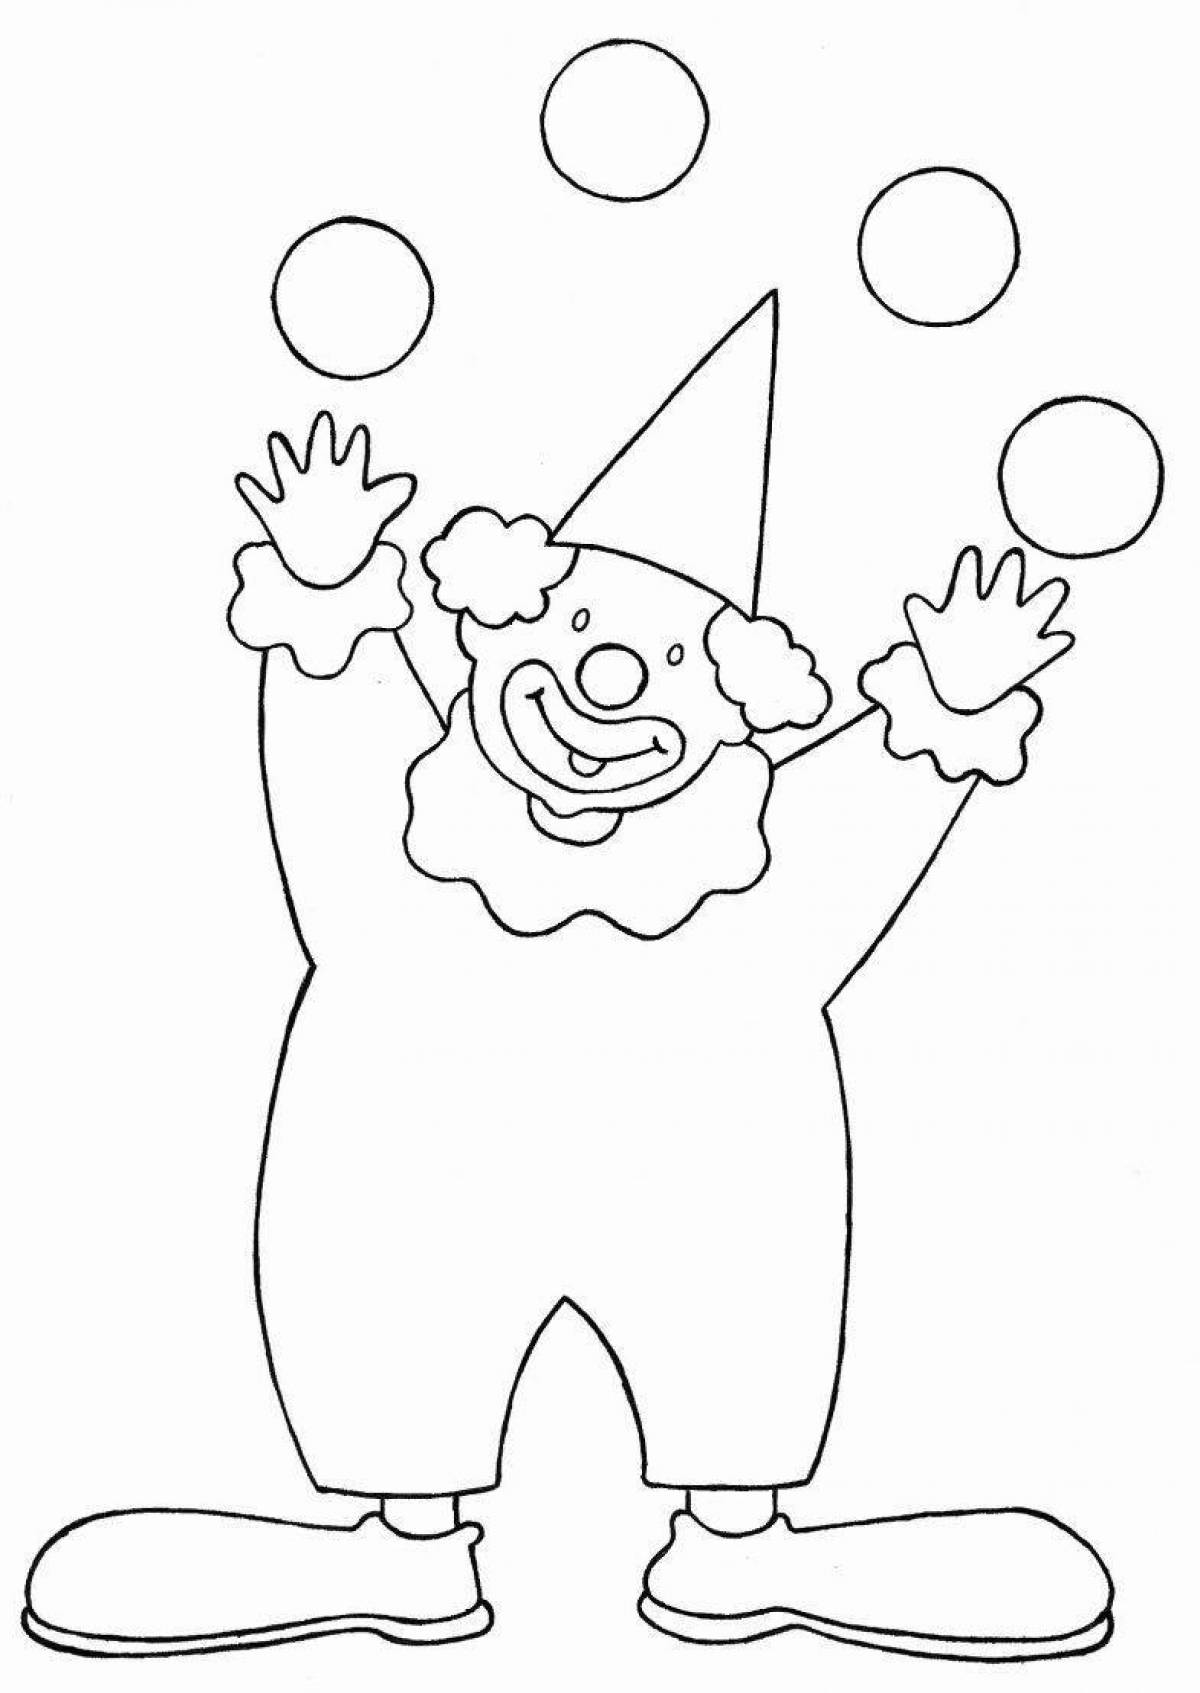 Bright clown drawing for kids